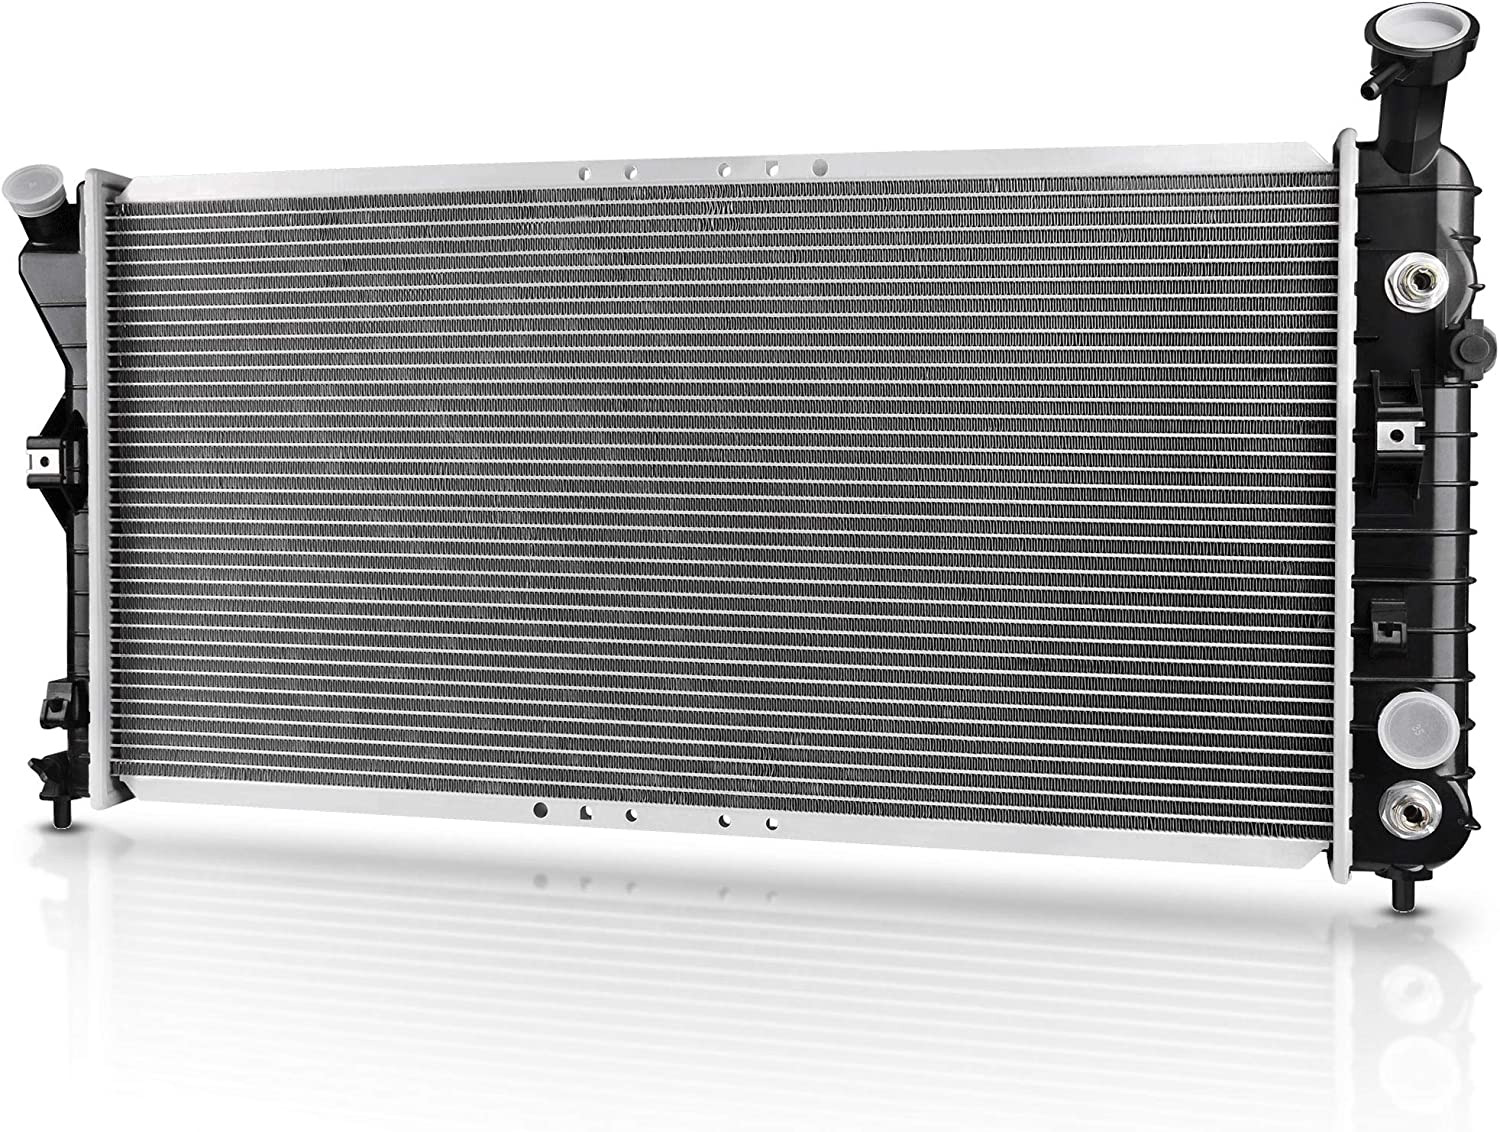 Radiator Complete Radiator Compatible with 2000-2003 Chevy Impala, 2000-2003 Che